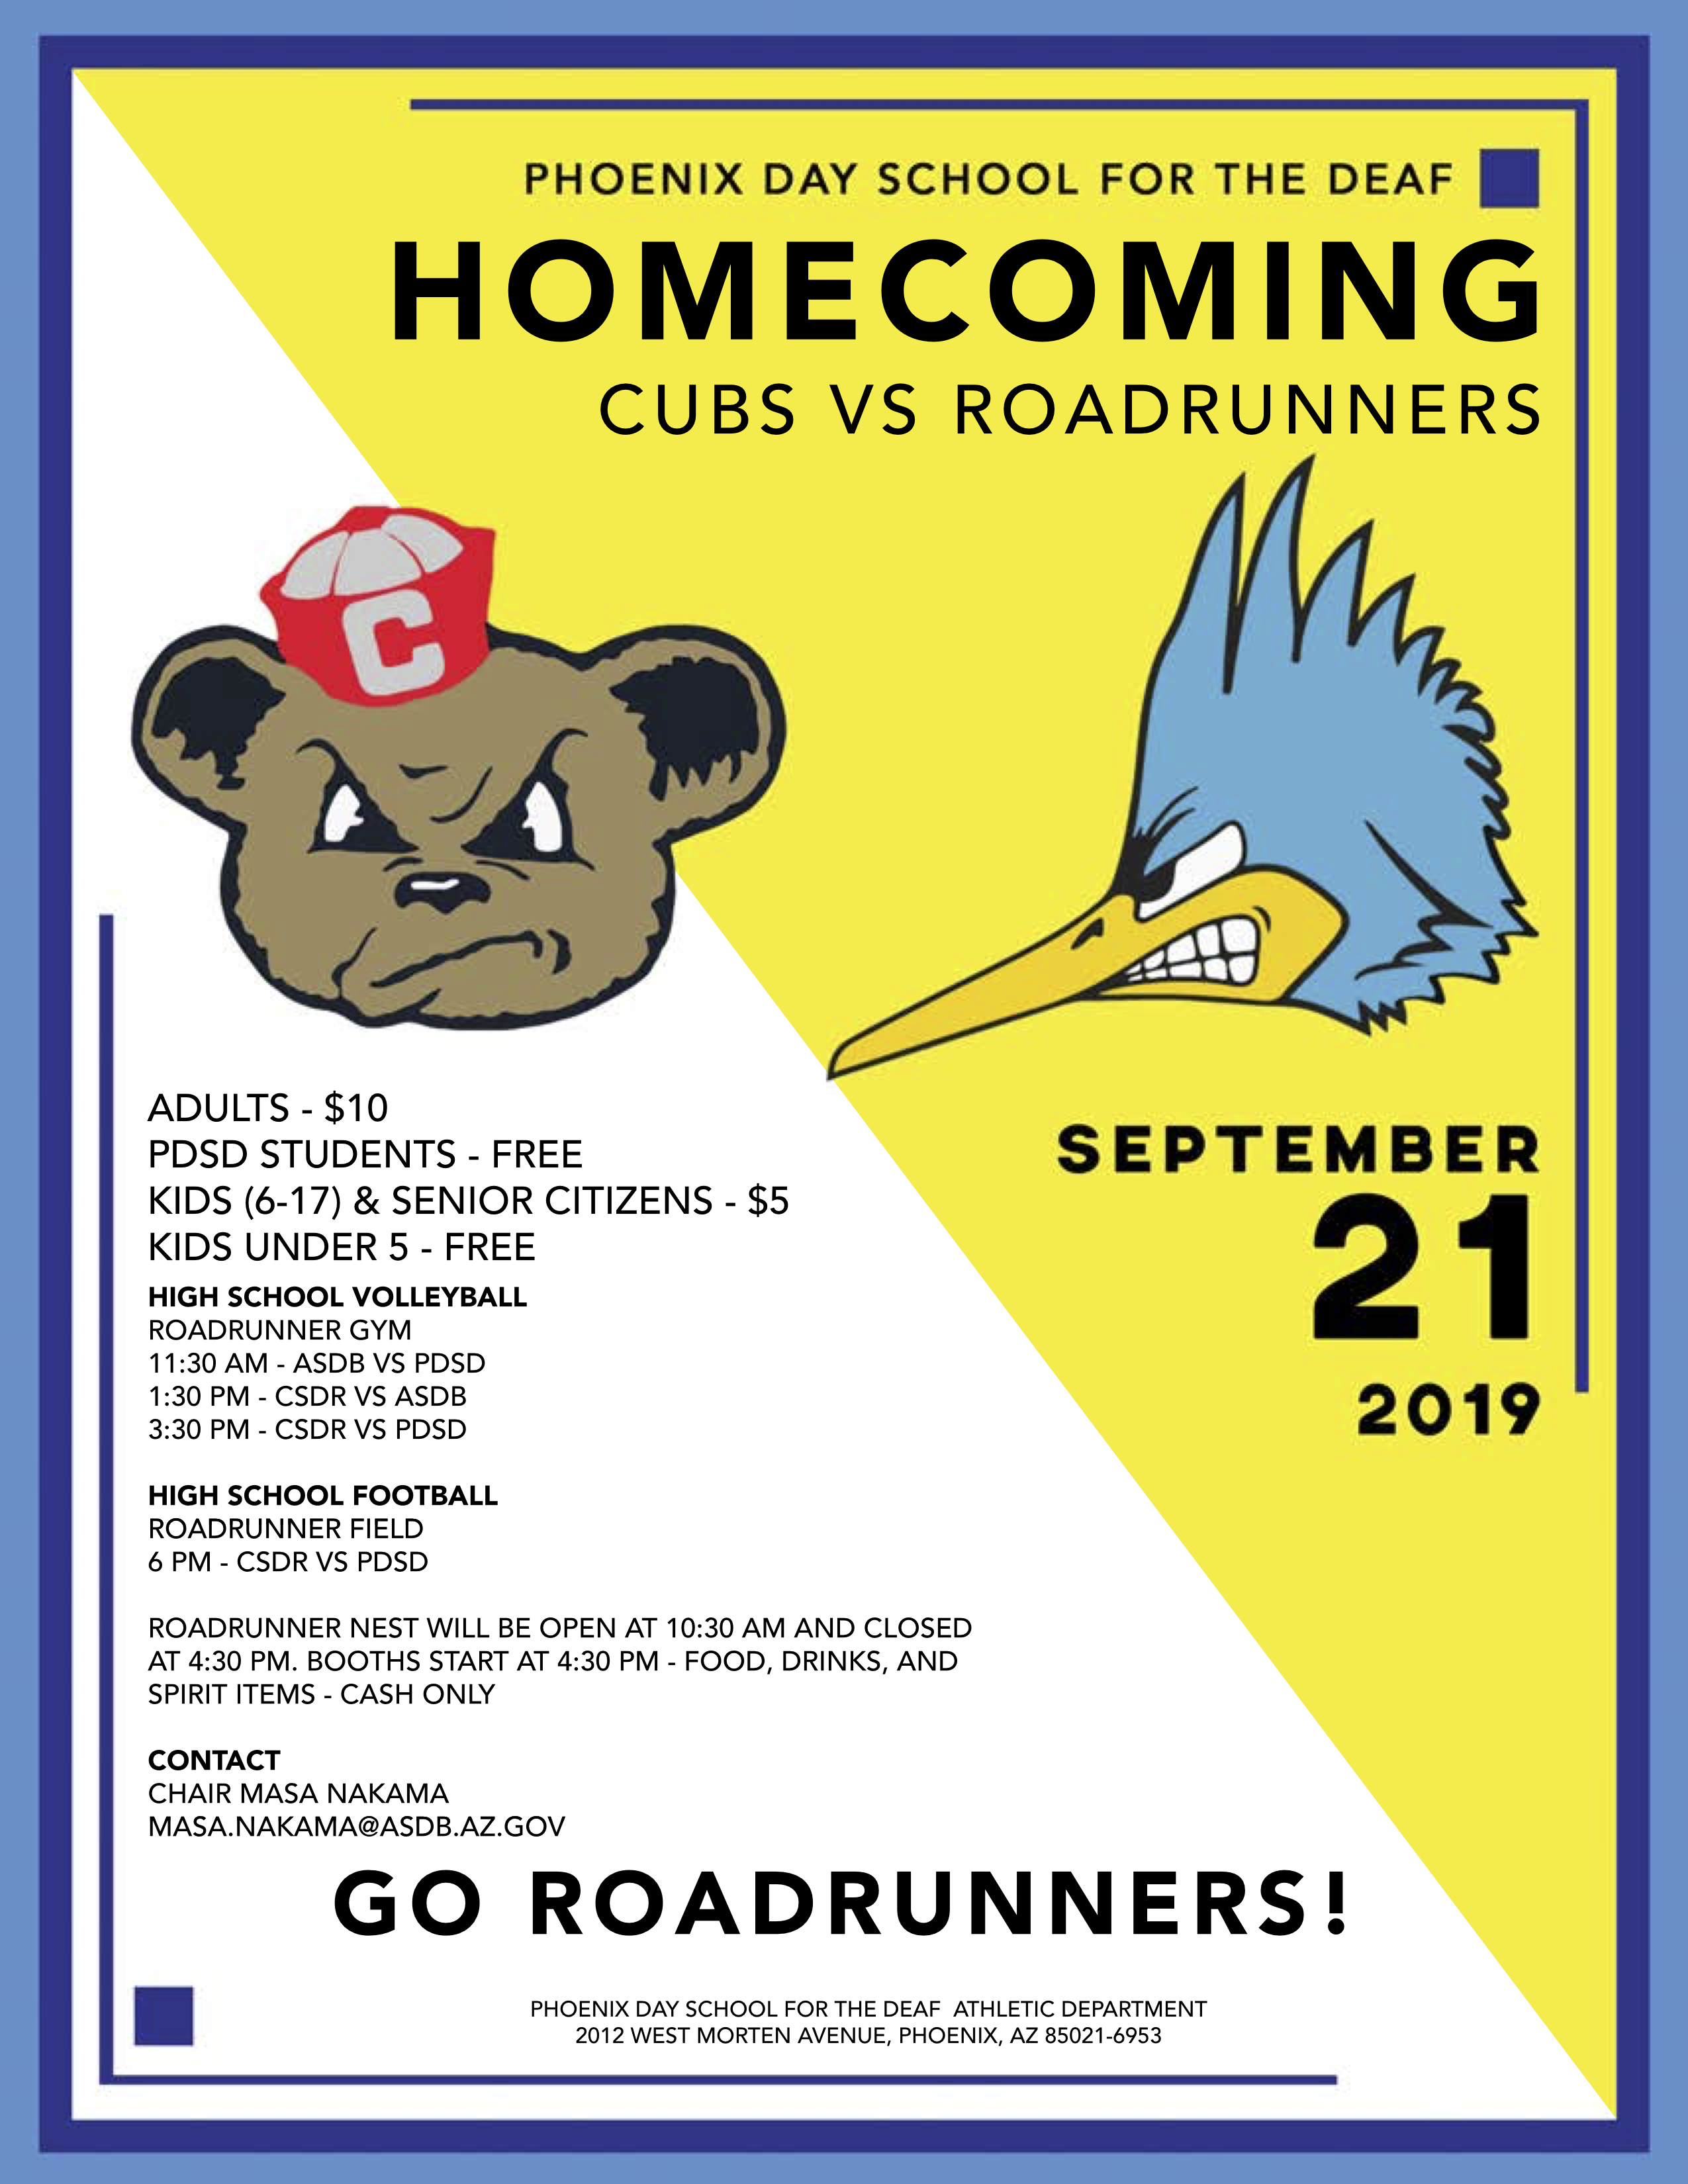 Phoenix Day School for the Deaf Homecoming. September 21, 2019. Cubs versus Roadrunners. Adults - $10. PDSD Students - Free. Kids (6-17) & Senior Citizens - $5. Kids Under 5 - Free. High School Volleyball in Roadrunner Gym. 11:30am - ASDB versus PDSD. 1:30pm - CSDR versus ASDB. 3:30pm - CSDR versus PDSD. High School Football at Roadrunner Field - 6pm - CSDR versus PDSD. Roadrunner nest will be open at 10:30am and closed at 4:30pm. Boths start at 4:30pm - food, drinks, and spirit items - cash only. Contact Chair Masa Nakama masa.nakama@asdb.az.gov. Go Roadrunners! Phoenix Day School for the Deaf Athletic Department - 2012 West Morten Avenue, Phoenix, Arizona 85021-6953